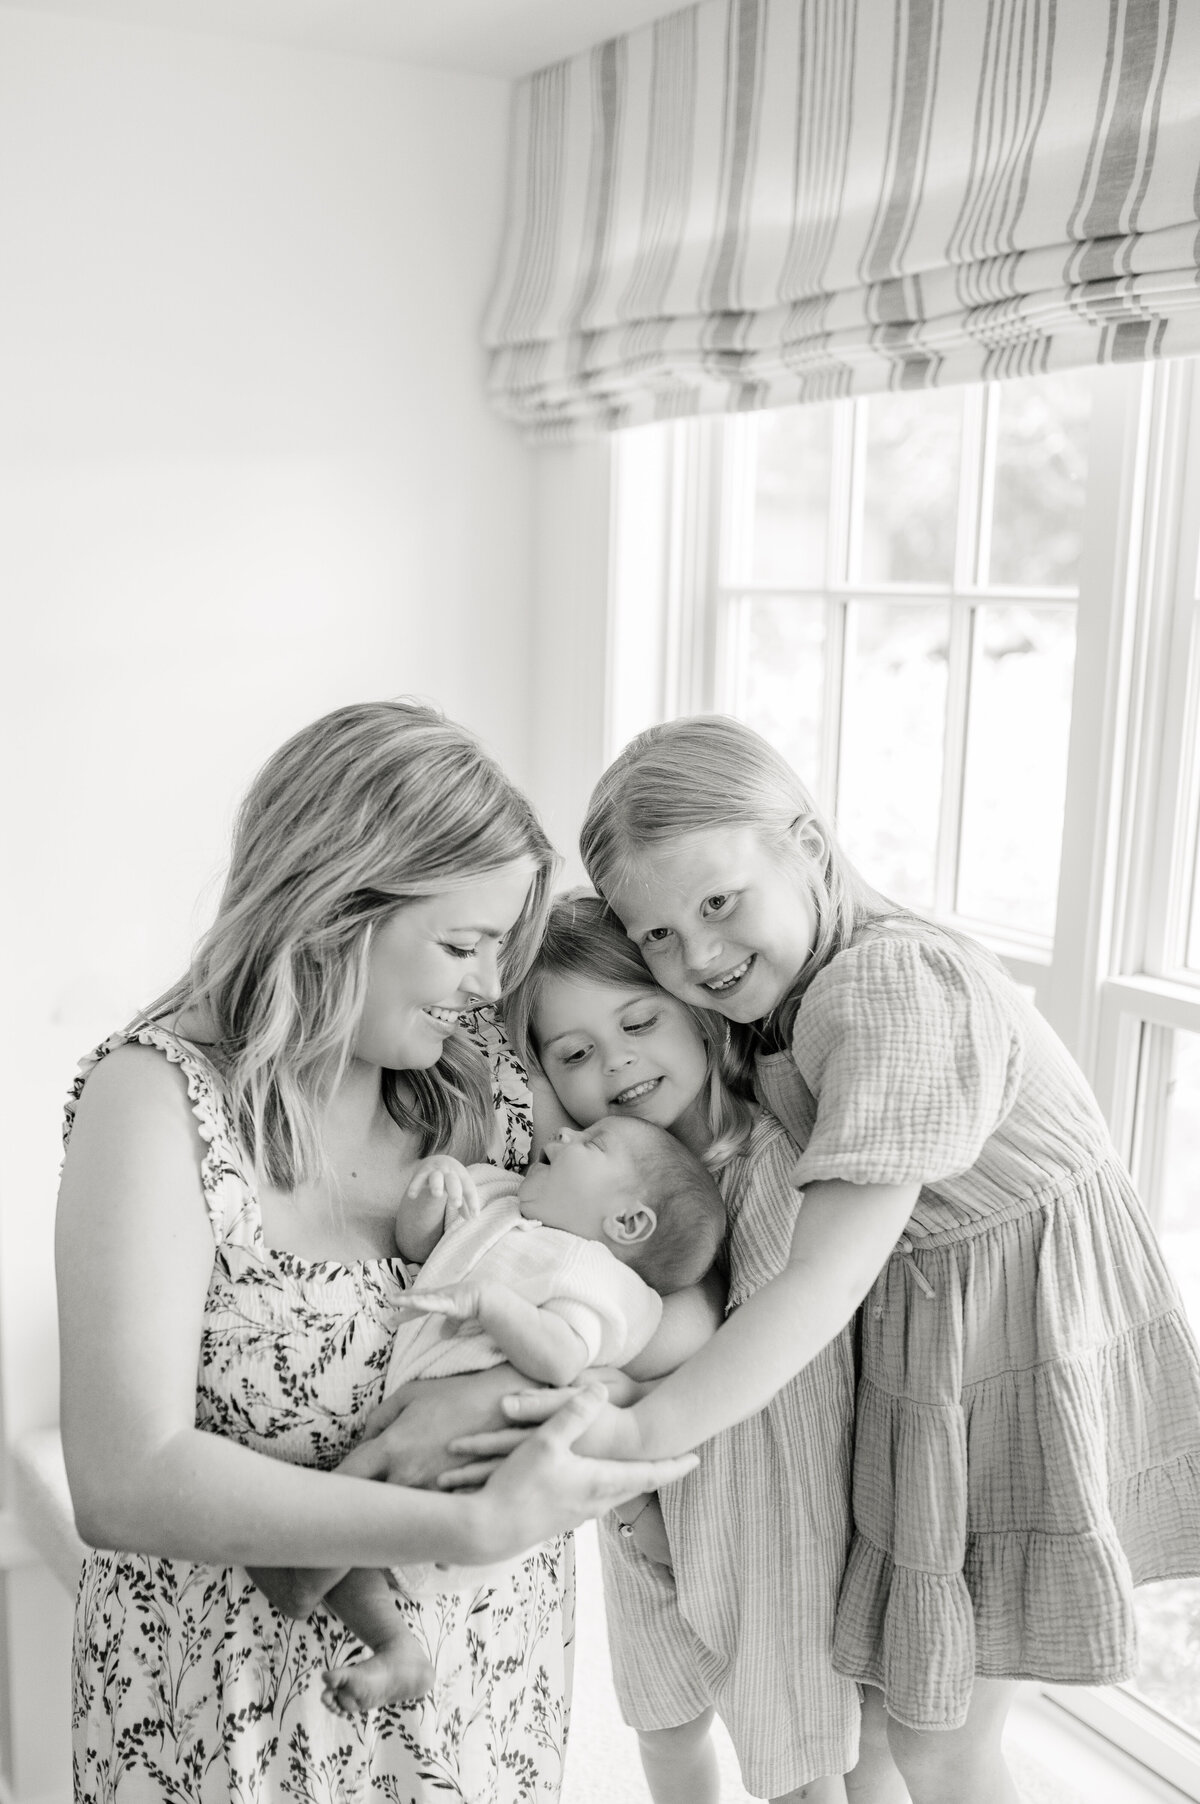 Mom stands holding newborn baby while two older daughters stand on a window ledge to snuggle baby brother